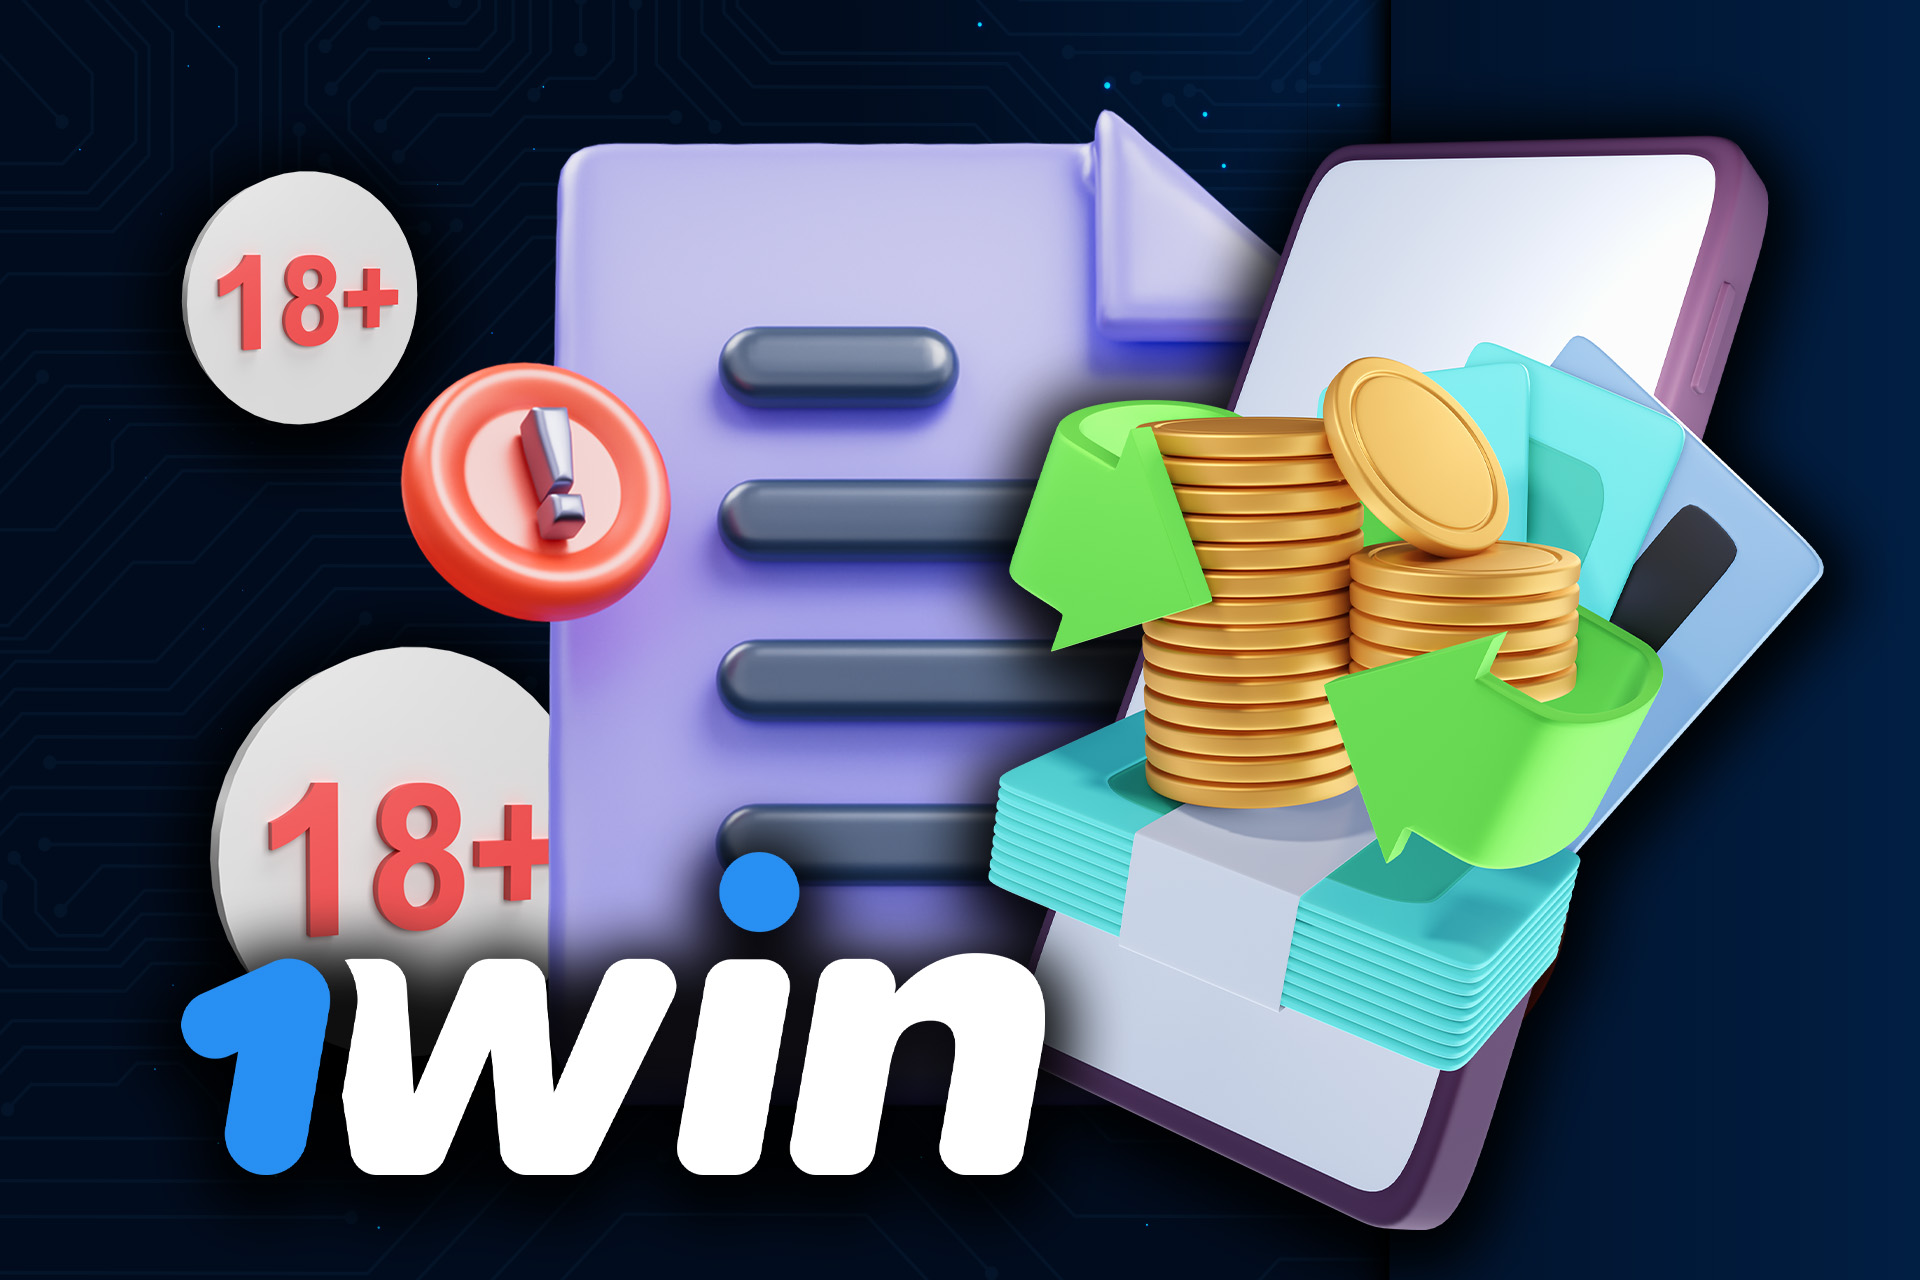 Meet these rules to withdraw your winnings from 1win.